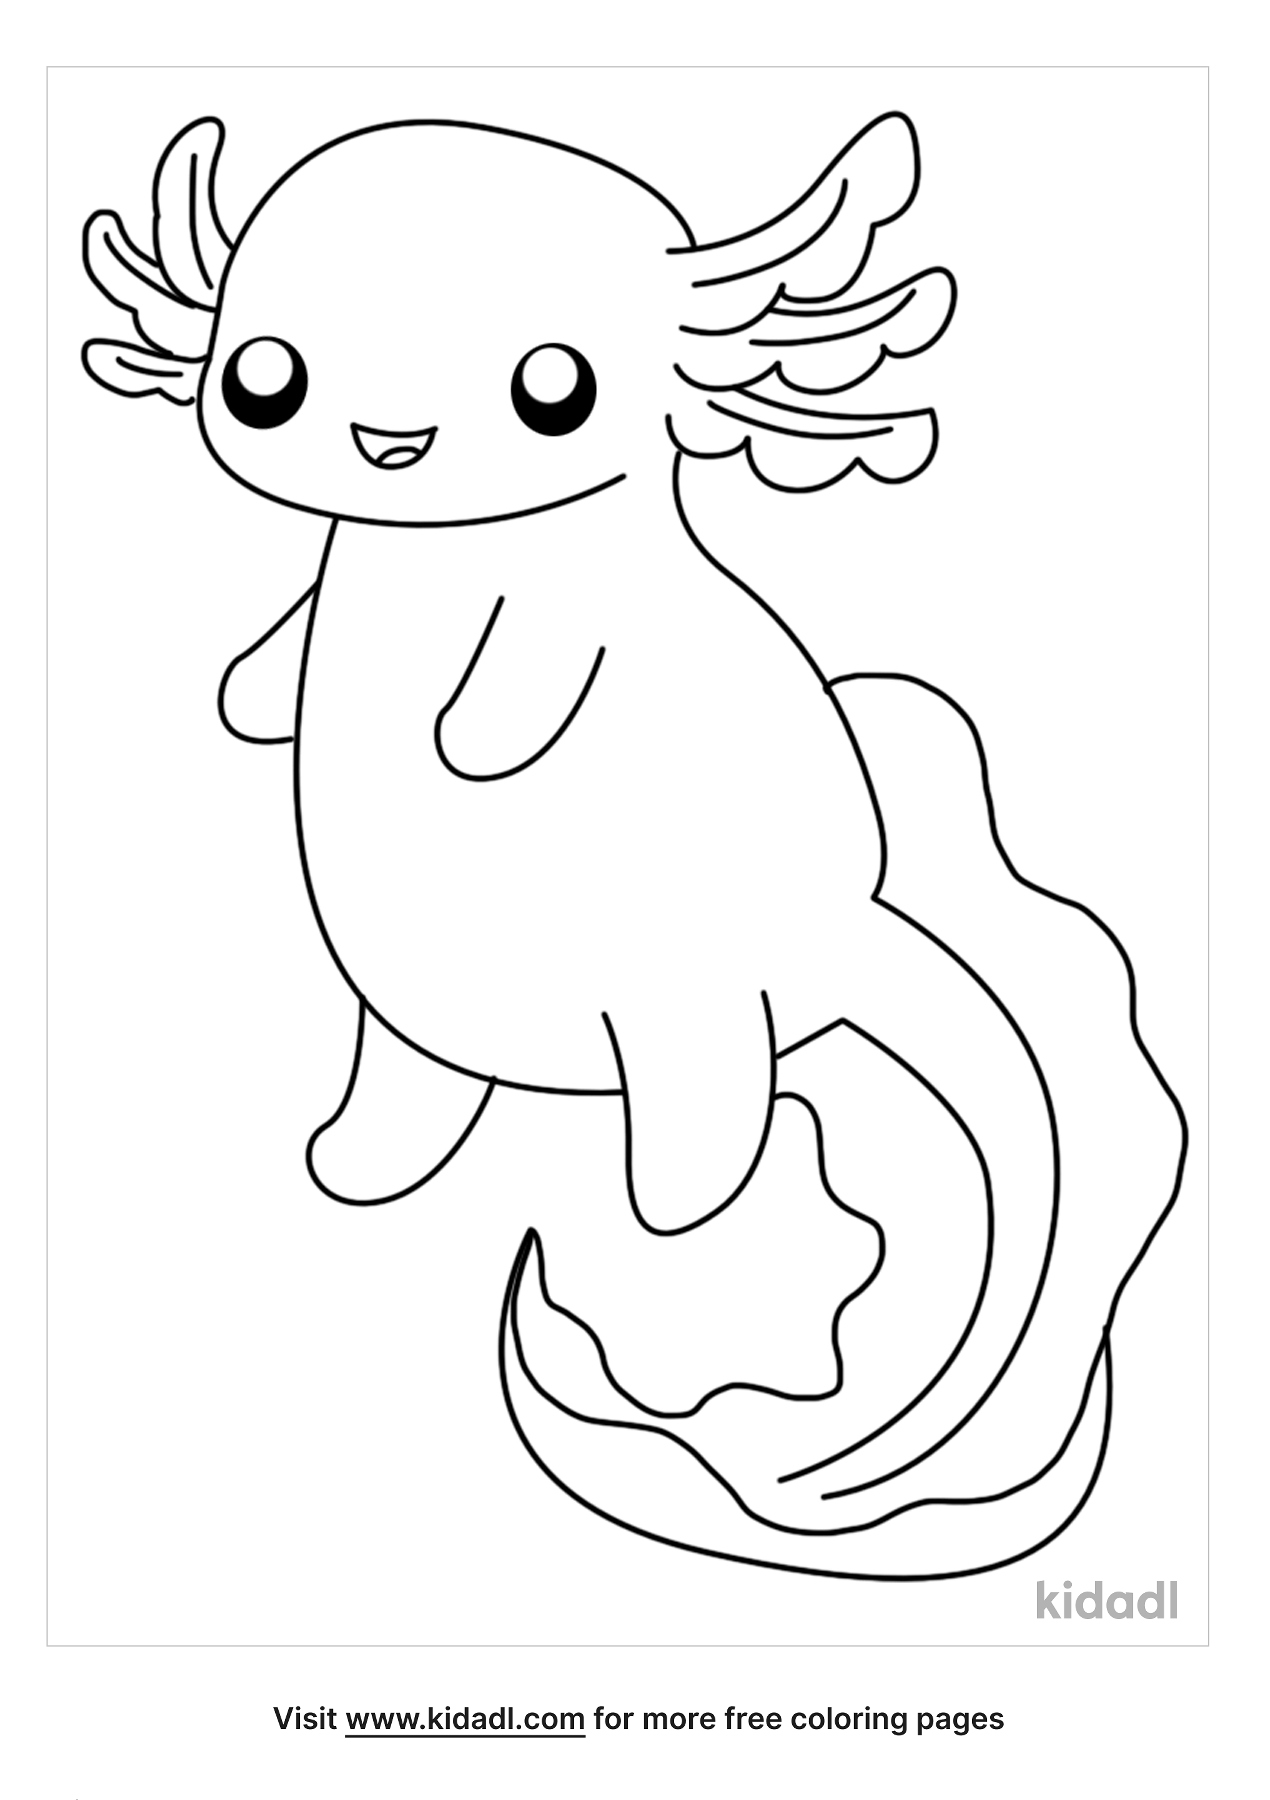 Mexican Axolotl Coloring Pages   Free Animals Coloring Pages ...